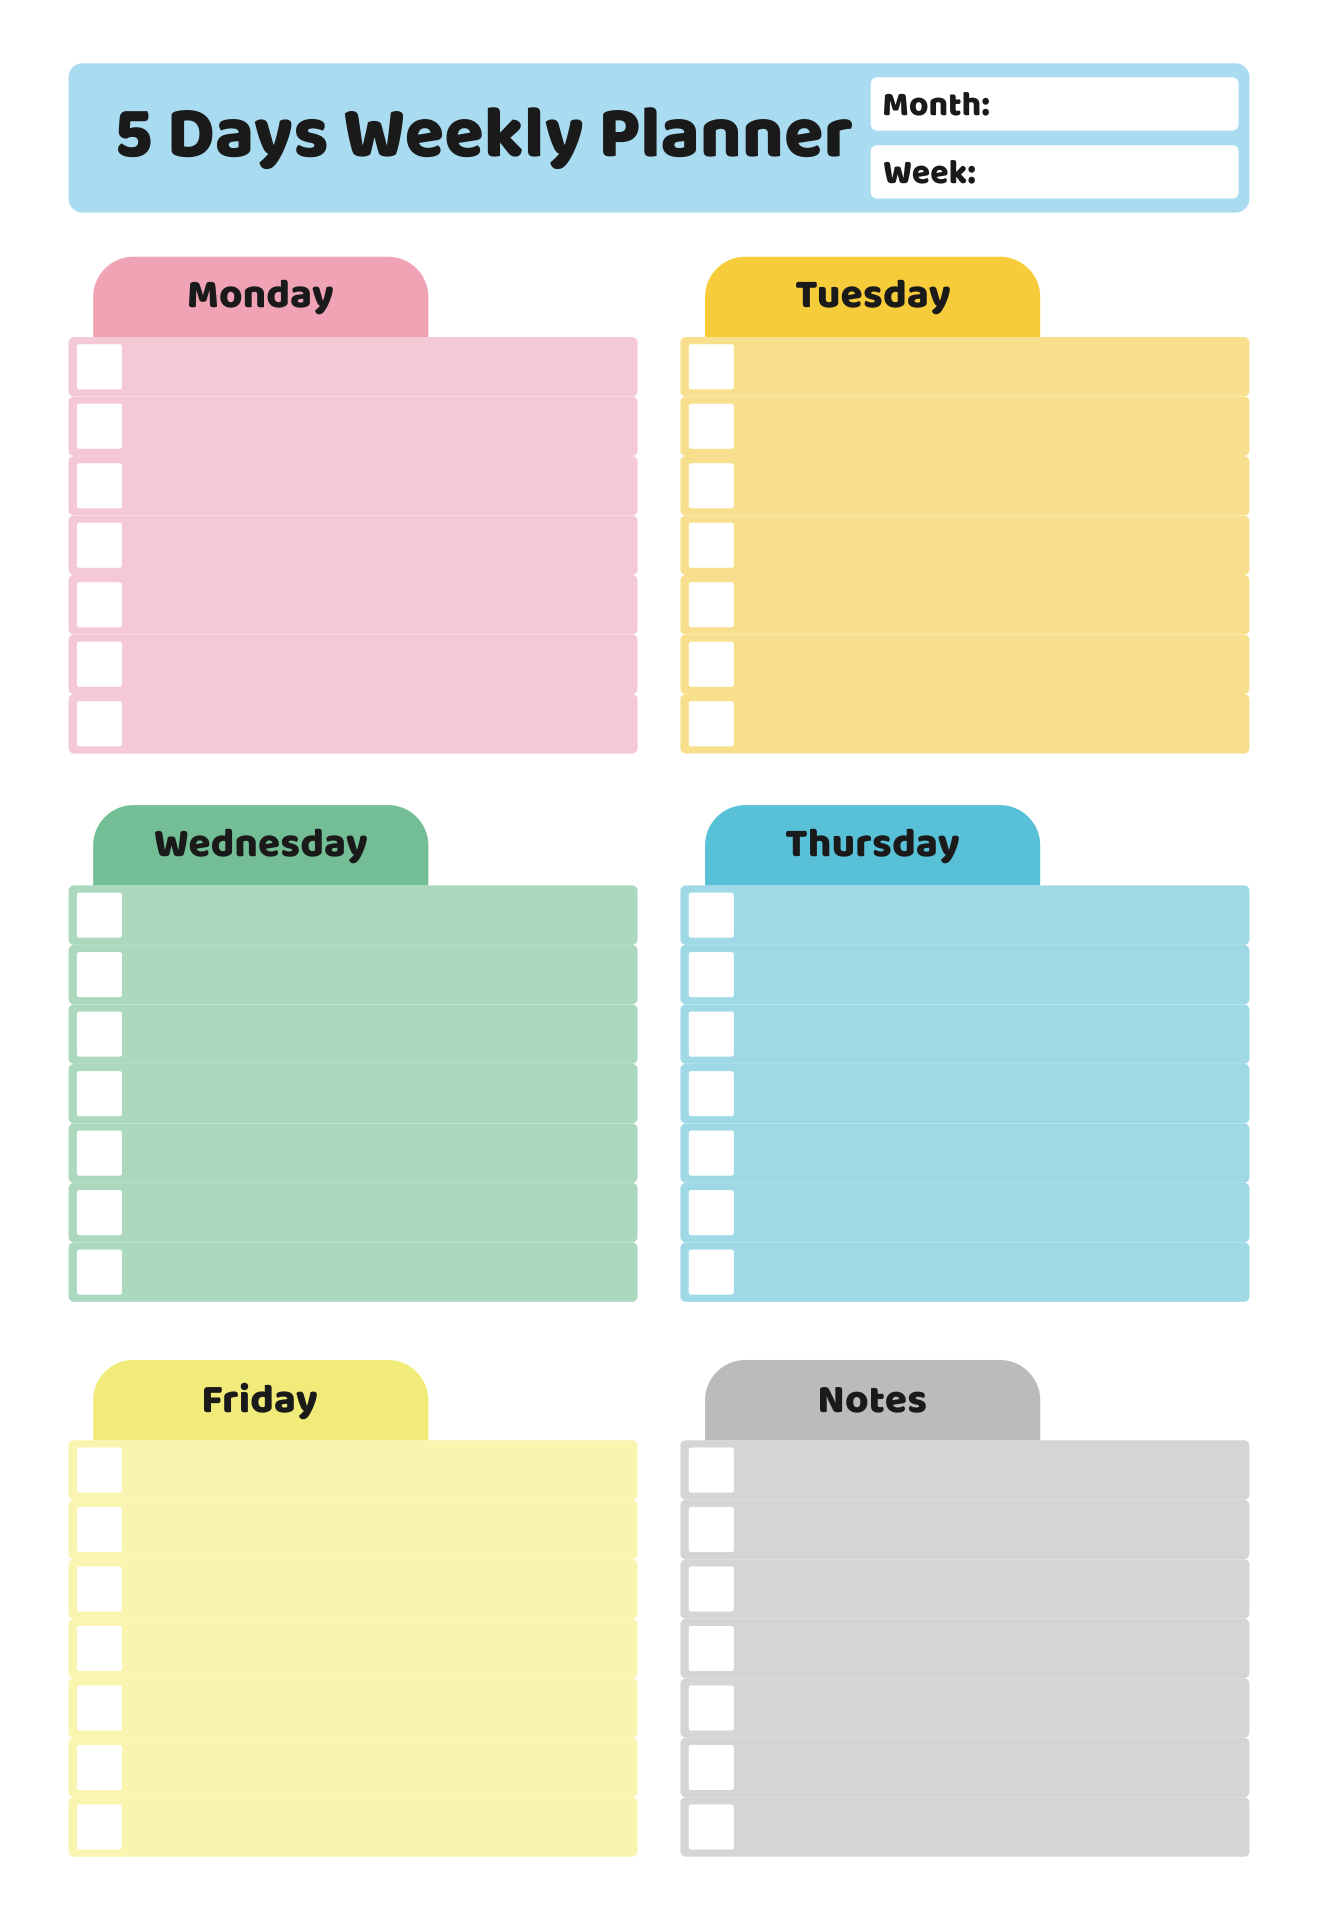 7-best-images-of-5-day-work-week-monthly-calendar-printable-5-day